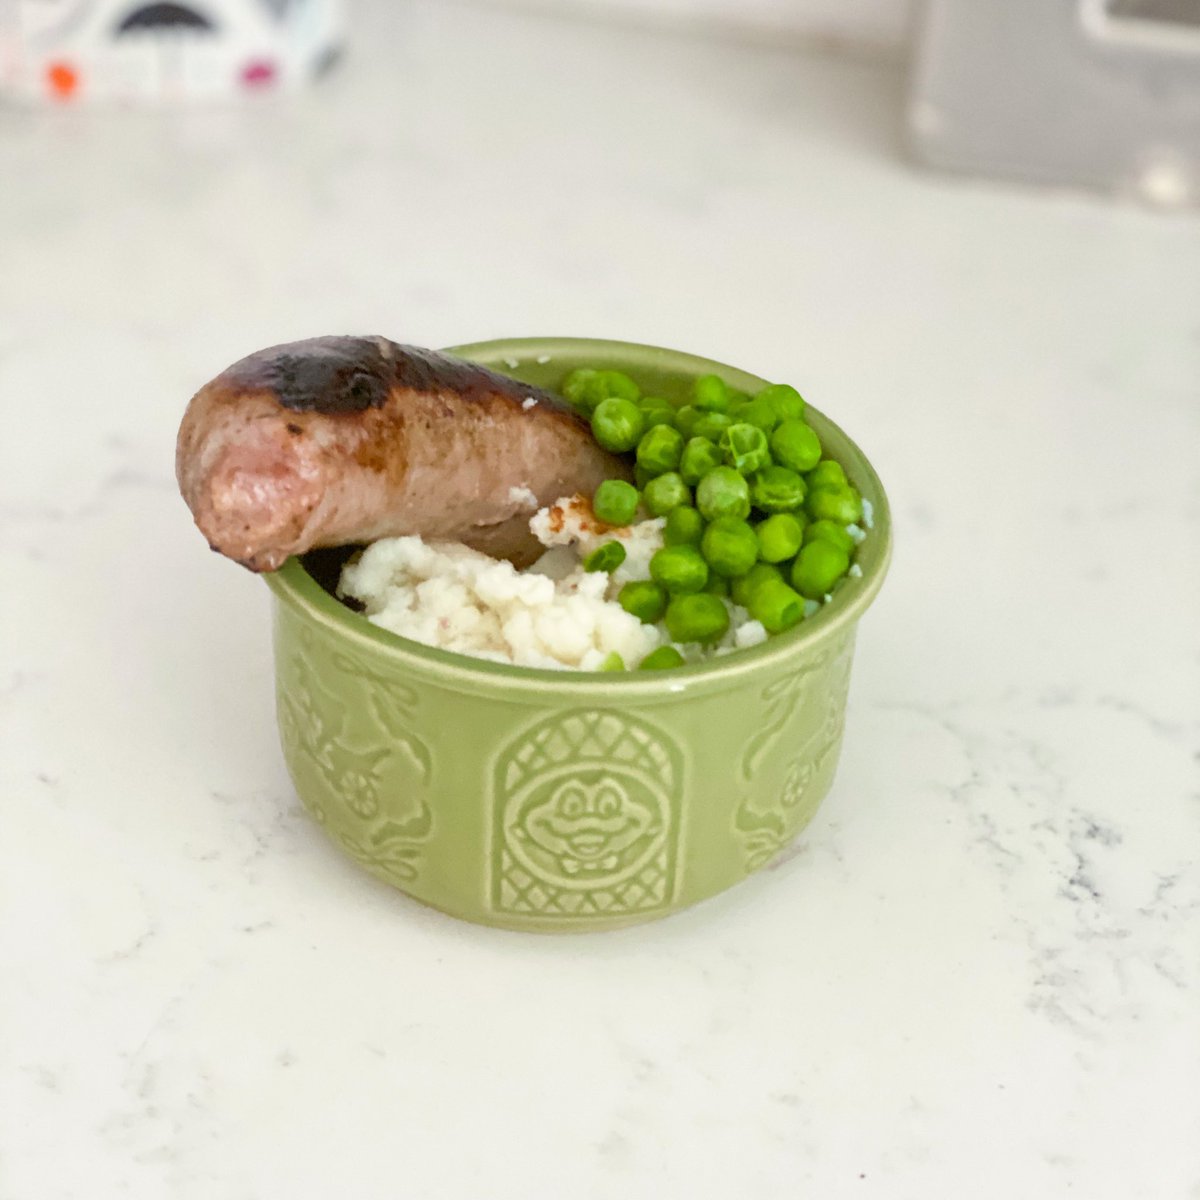 Across the pond for DQFF today!Mr. Toad’s Bangers and Mash with a side of sweet peas. Souvenir dish available.